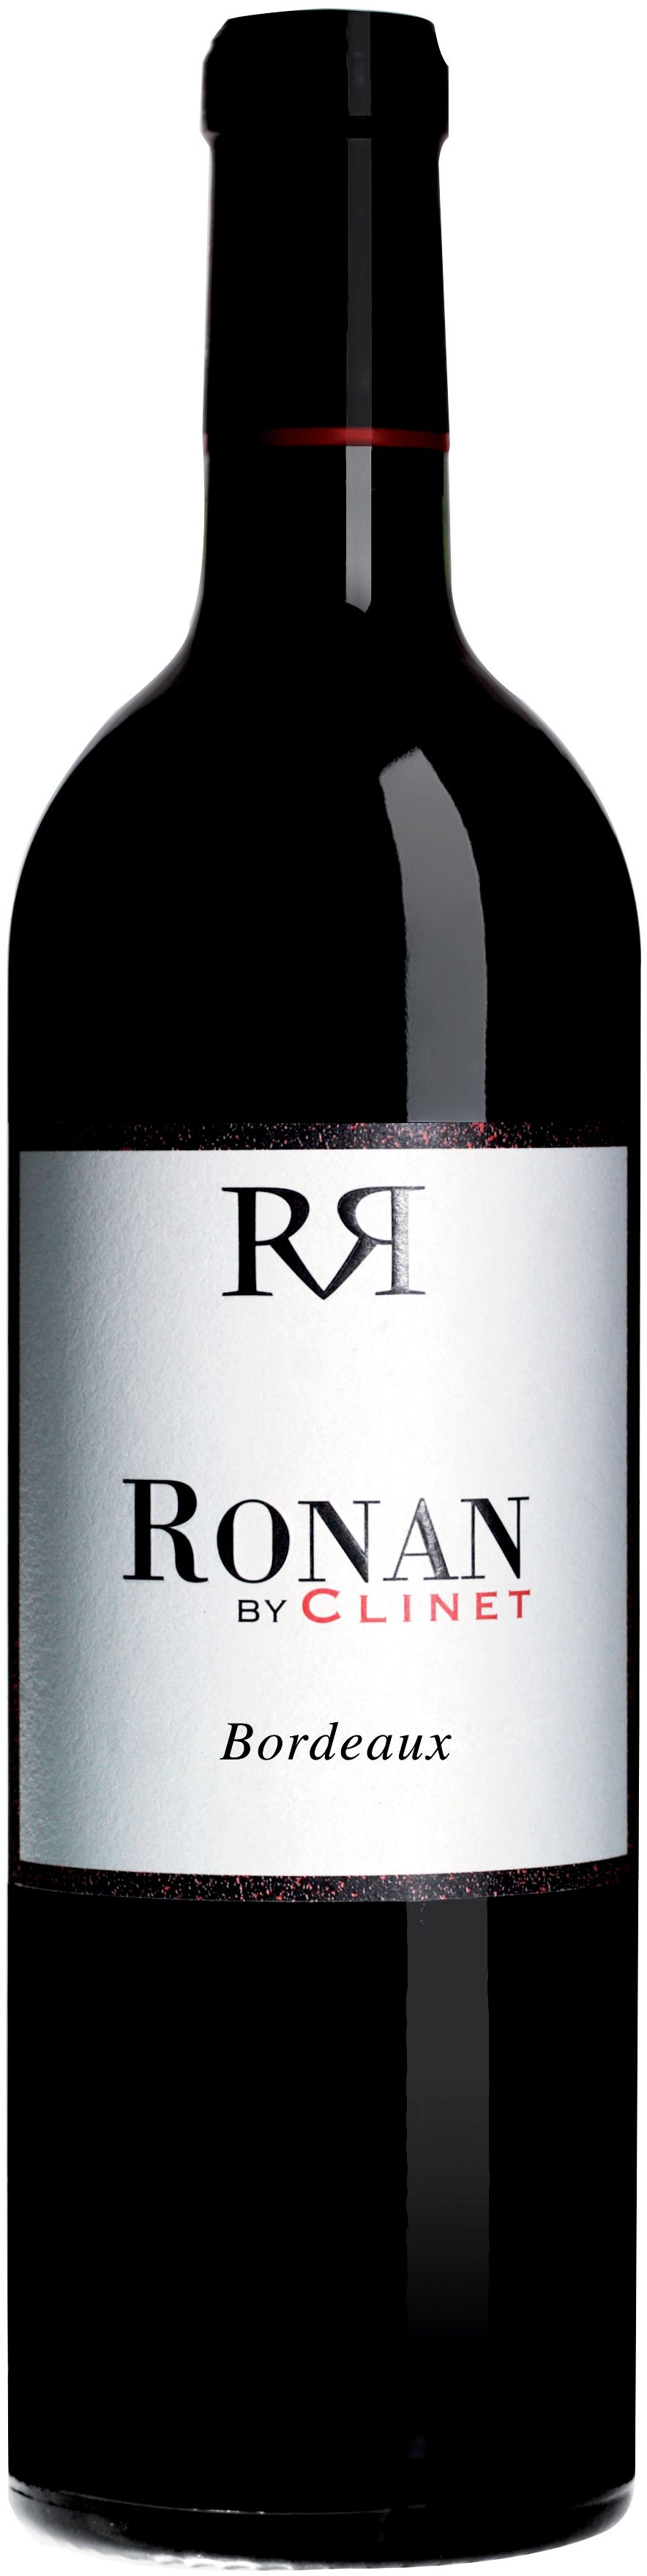 Chateau Clinet, Ronan By Clinet Rouge, 2014